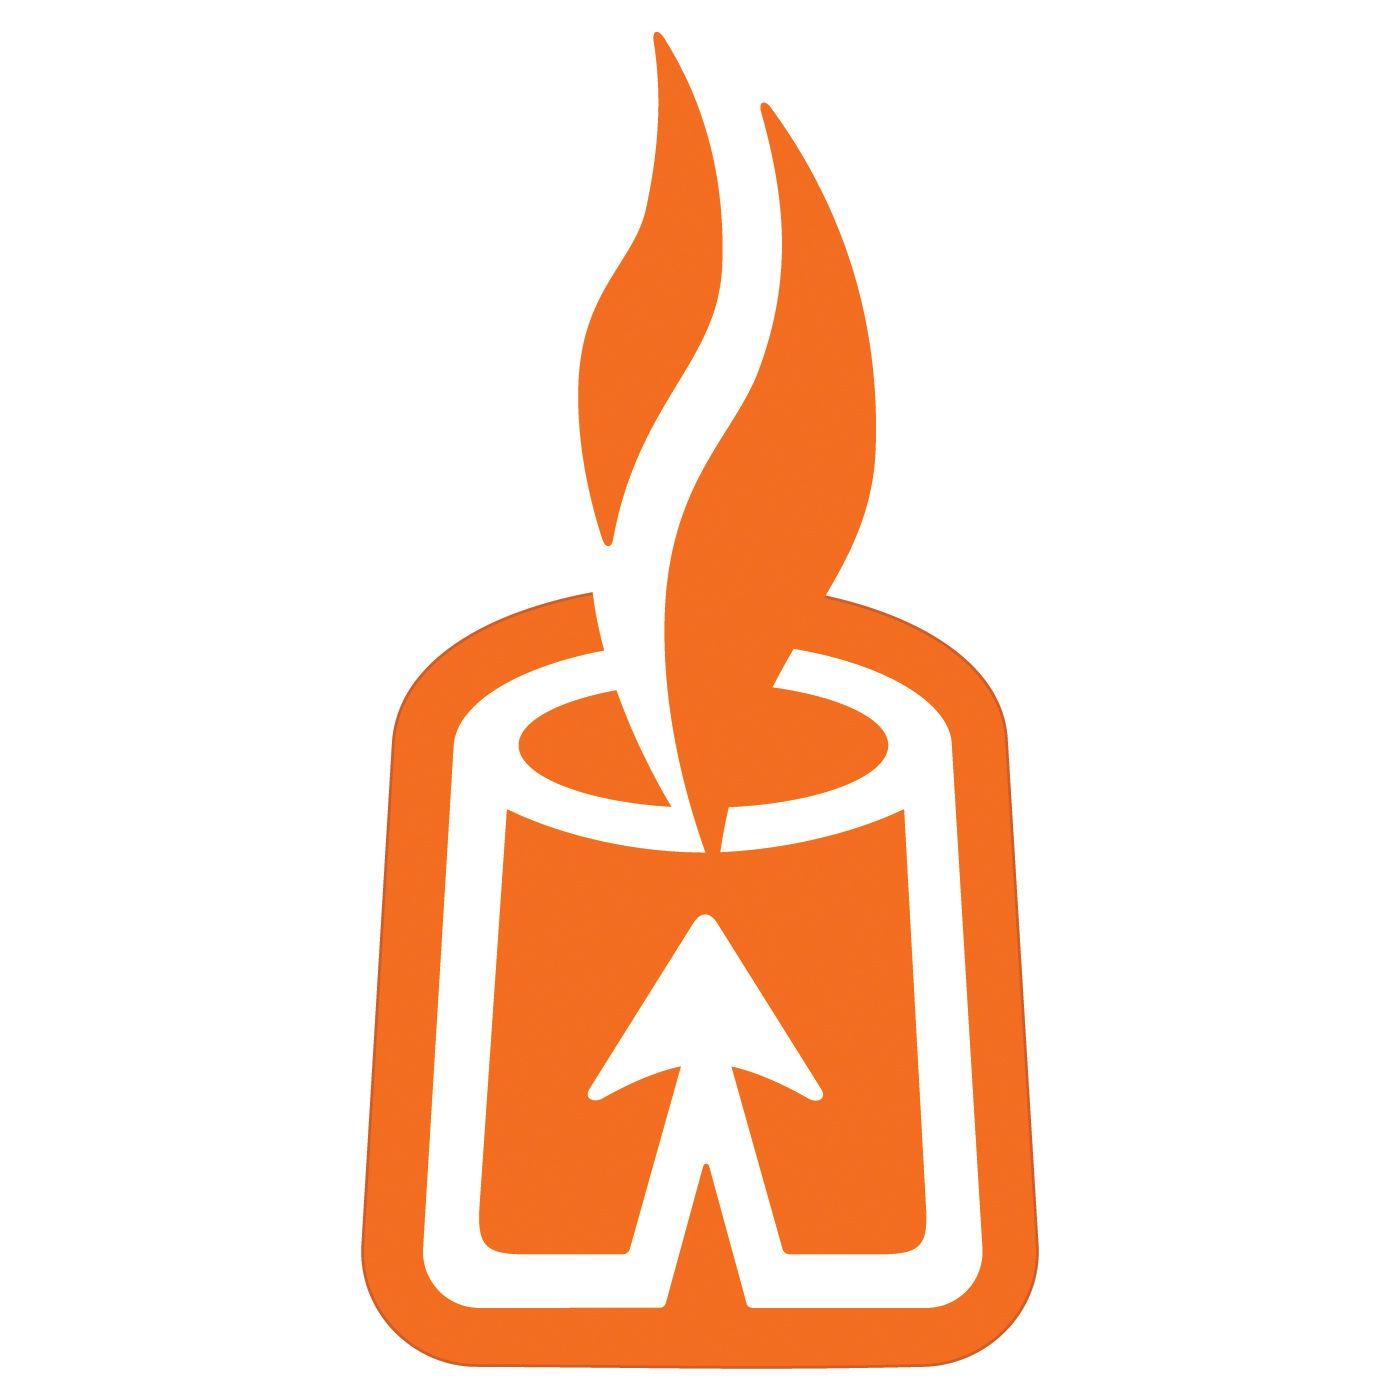 Orange and White Arrow Logo - Gardner Design logo design. A tower with an arrow pointing up